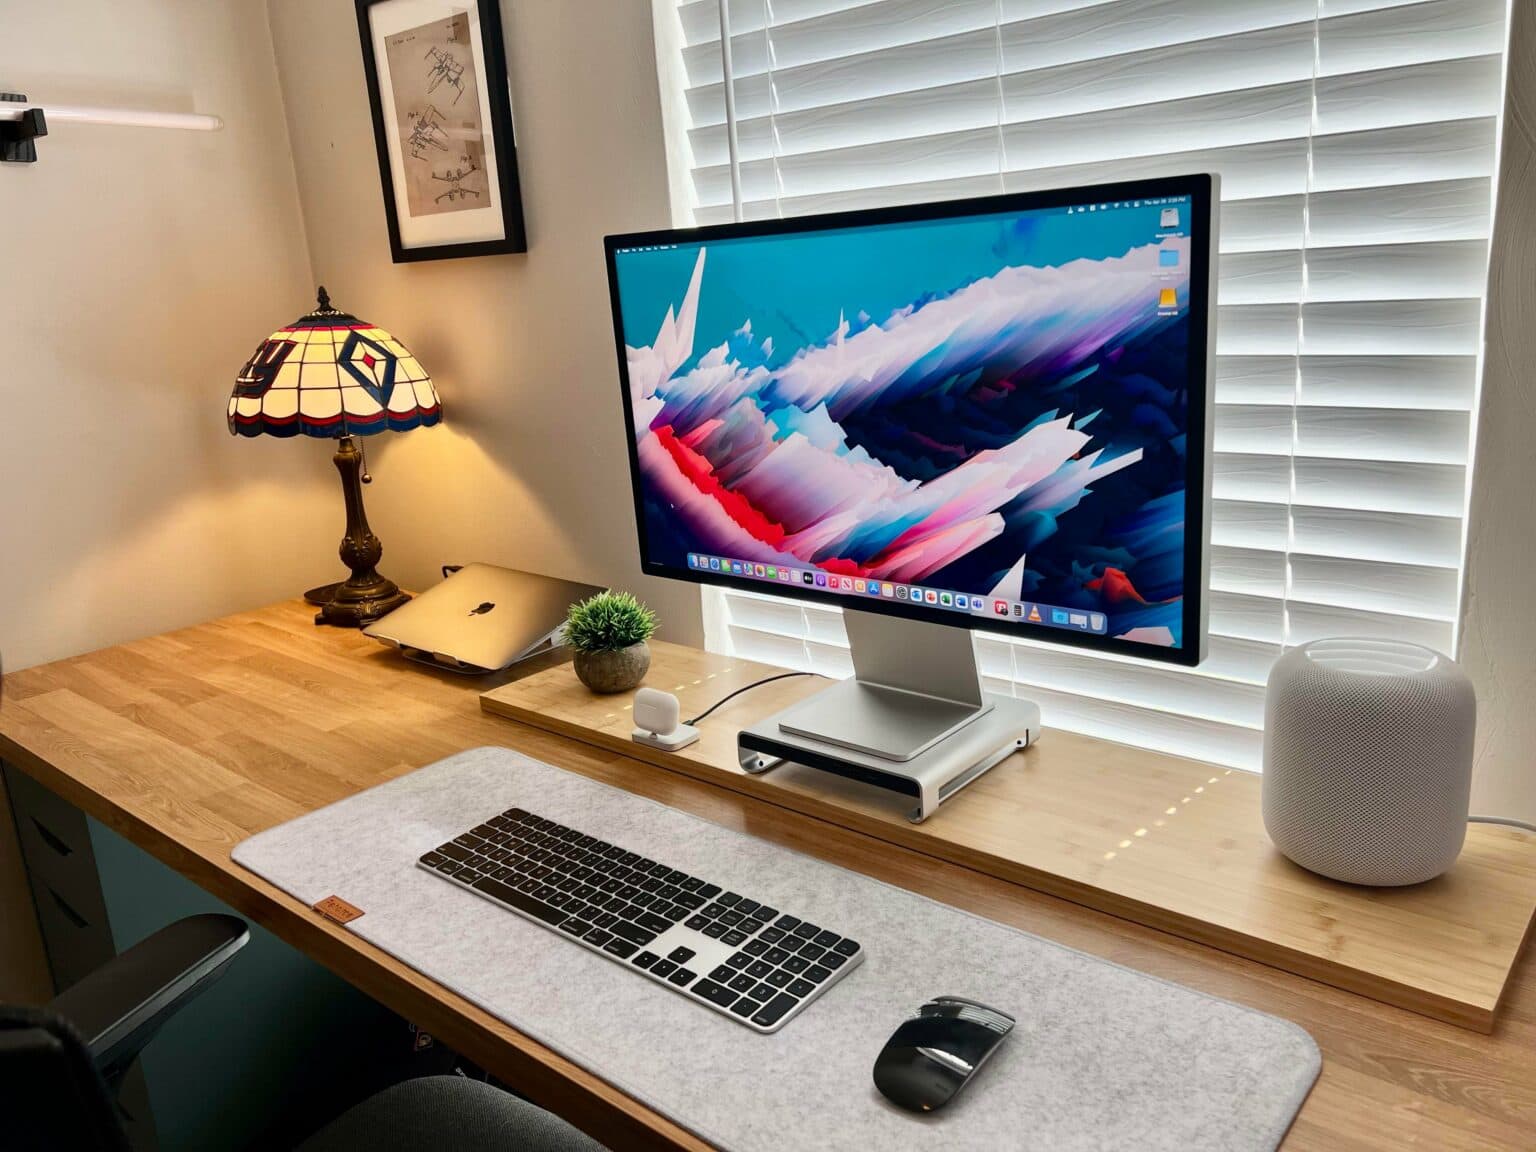 The Studio Display now has silver-and-black peripherals and a MacBook Pro rather than a Mac mini.